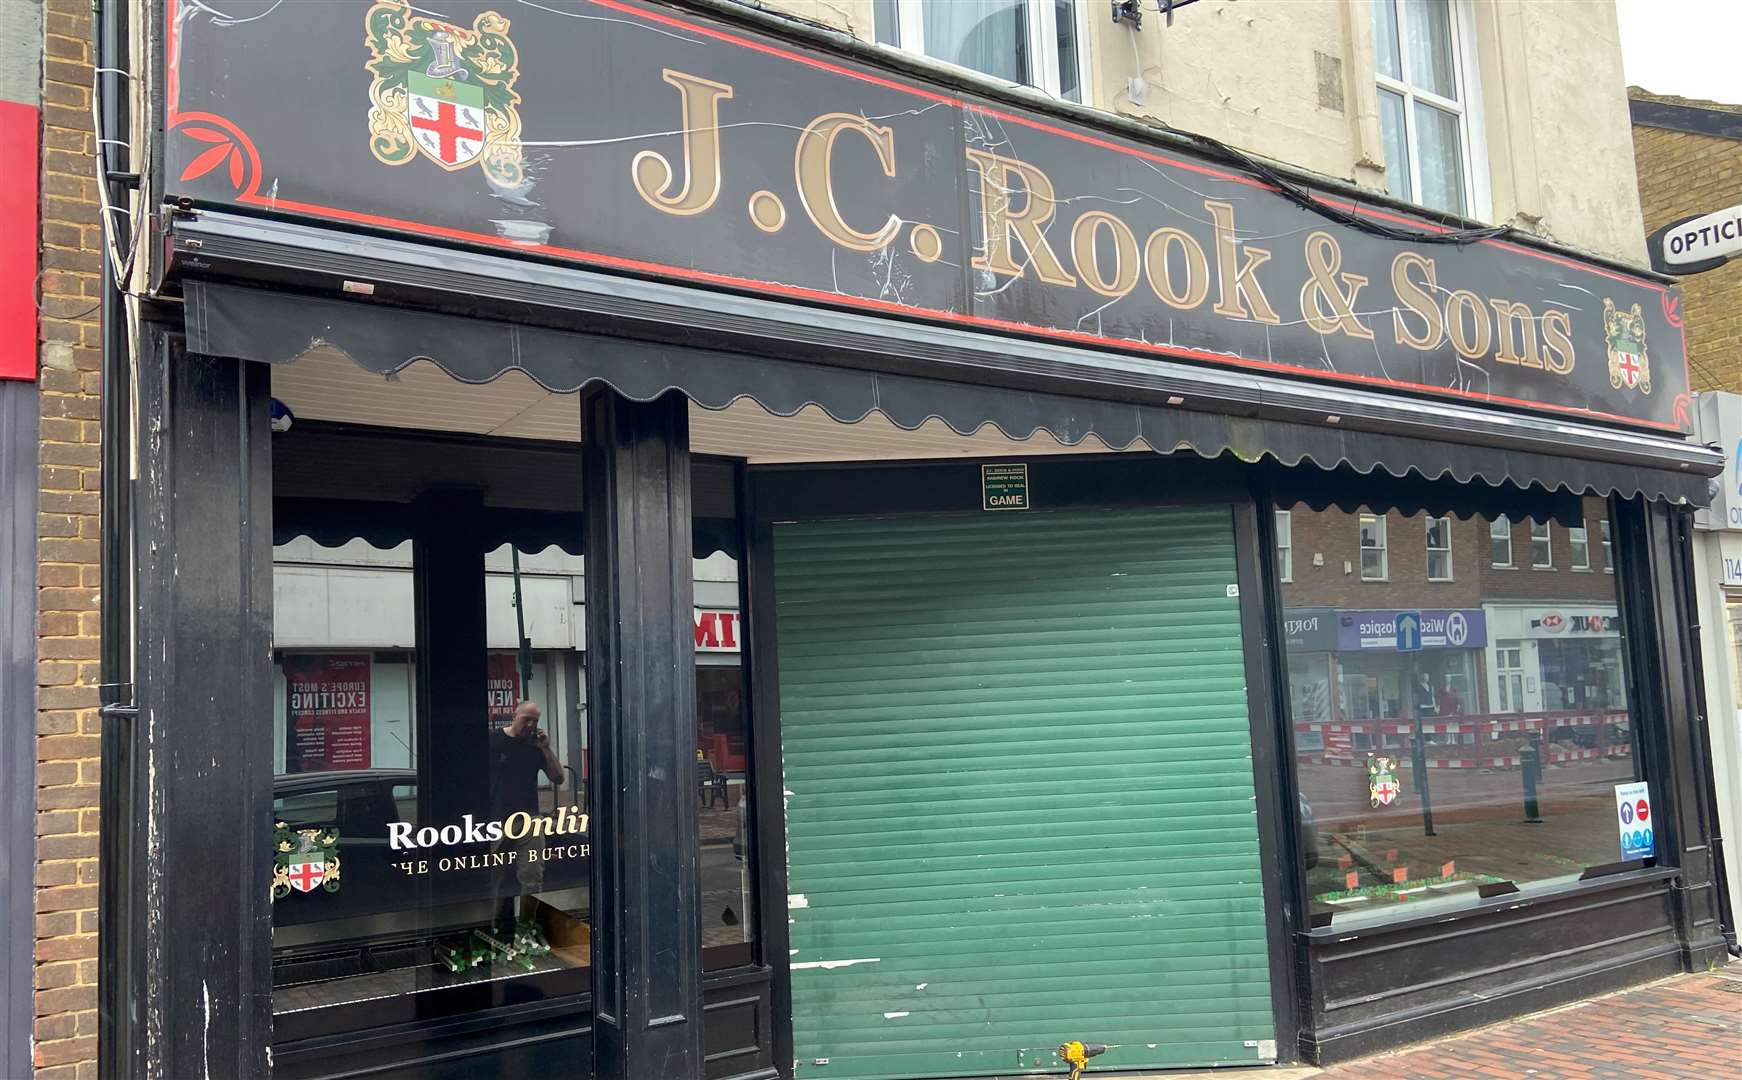 JC Rook and Sons butchers closed in Sittingbourne High Street